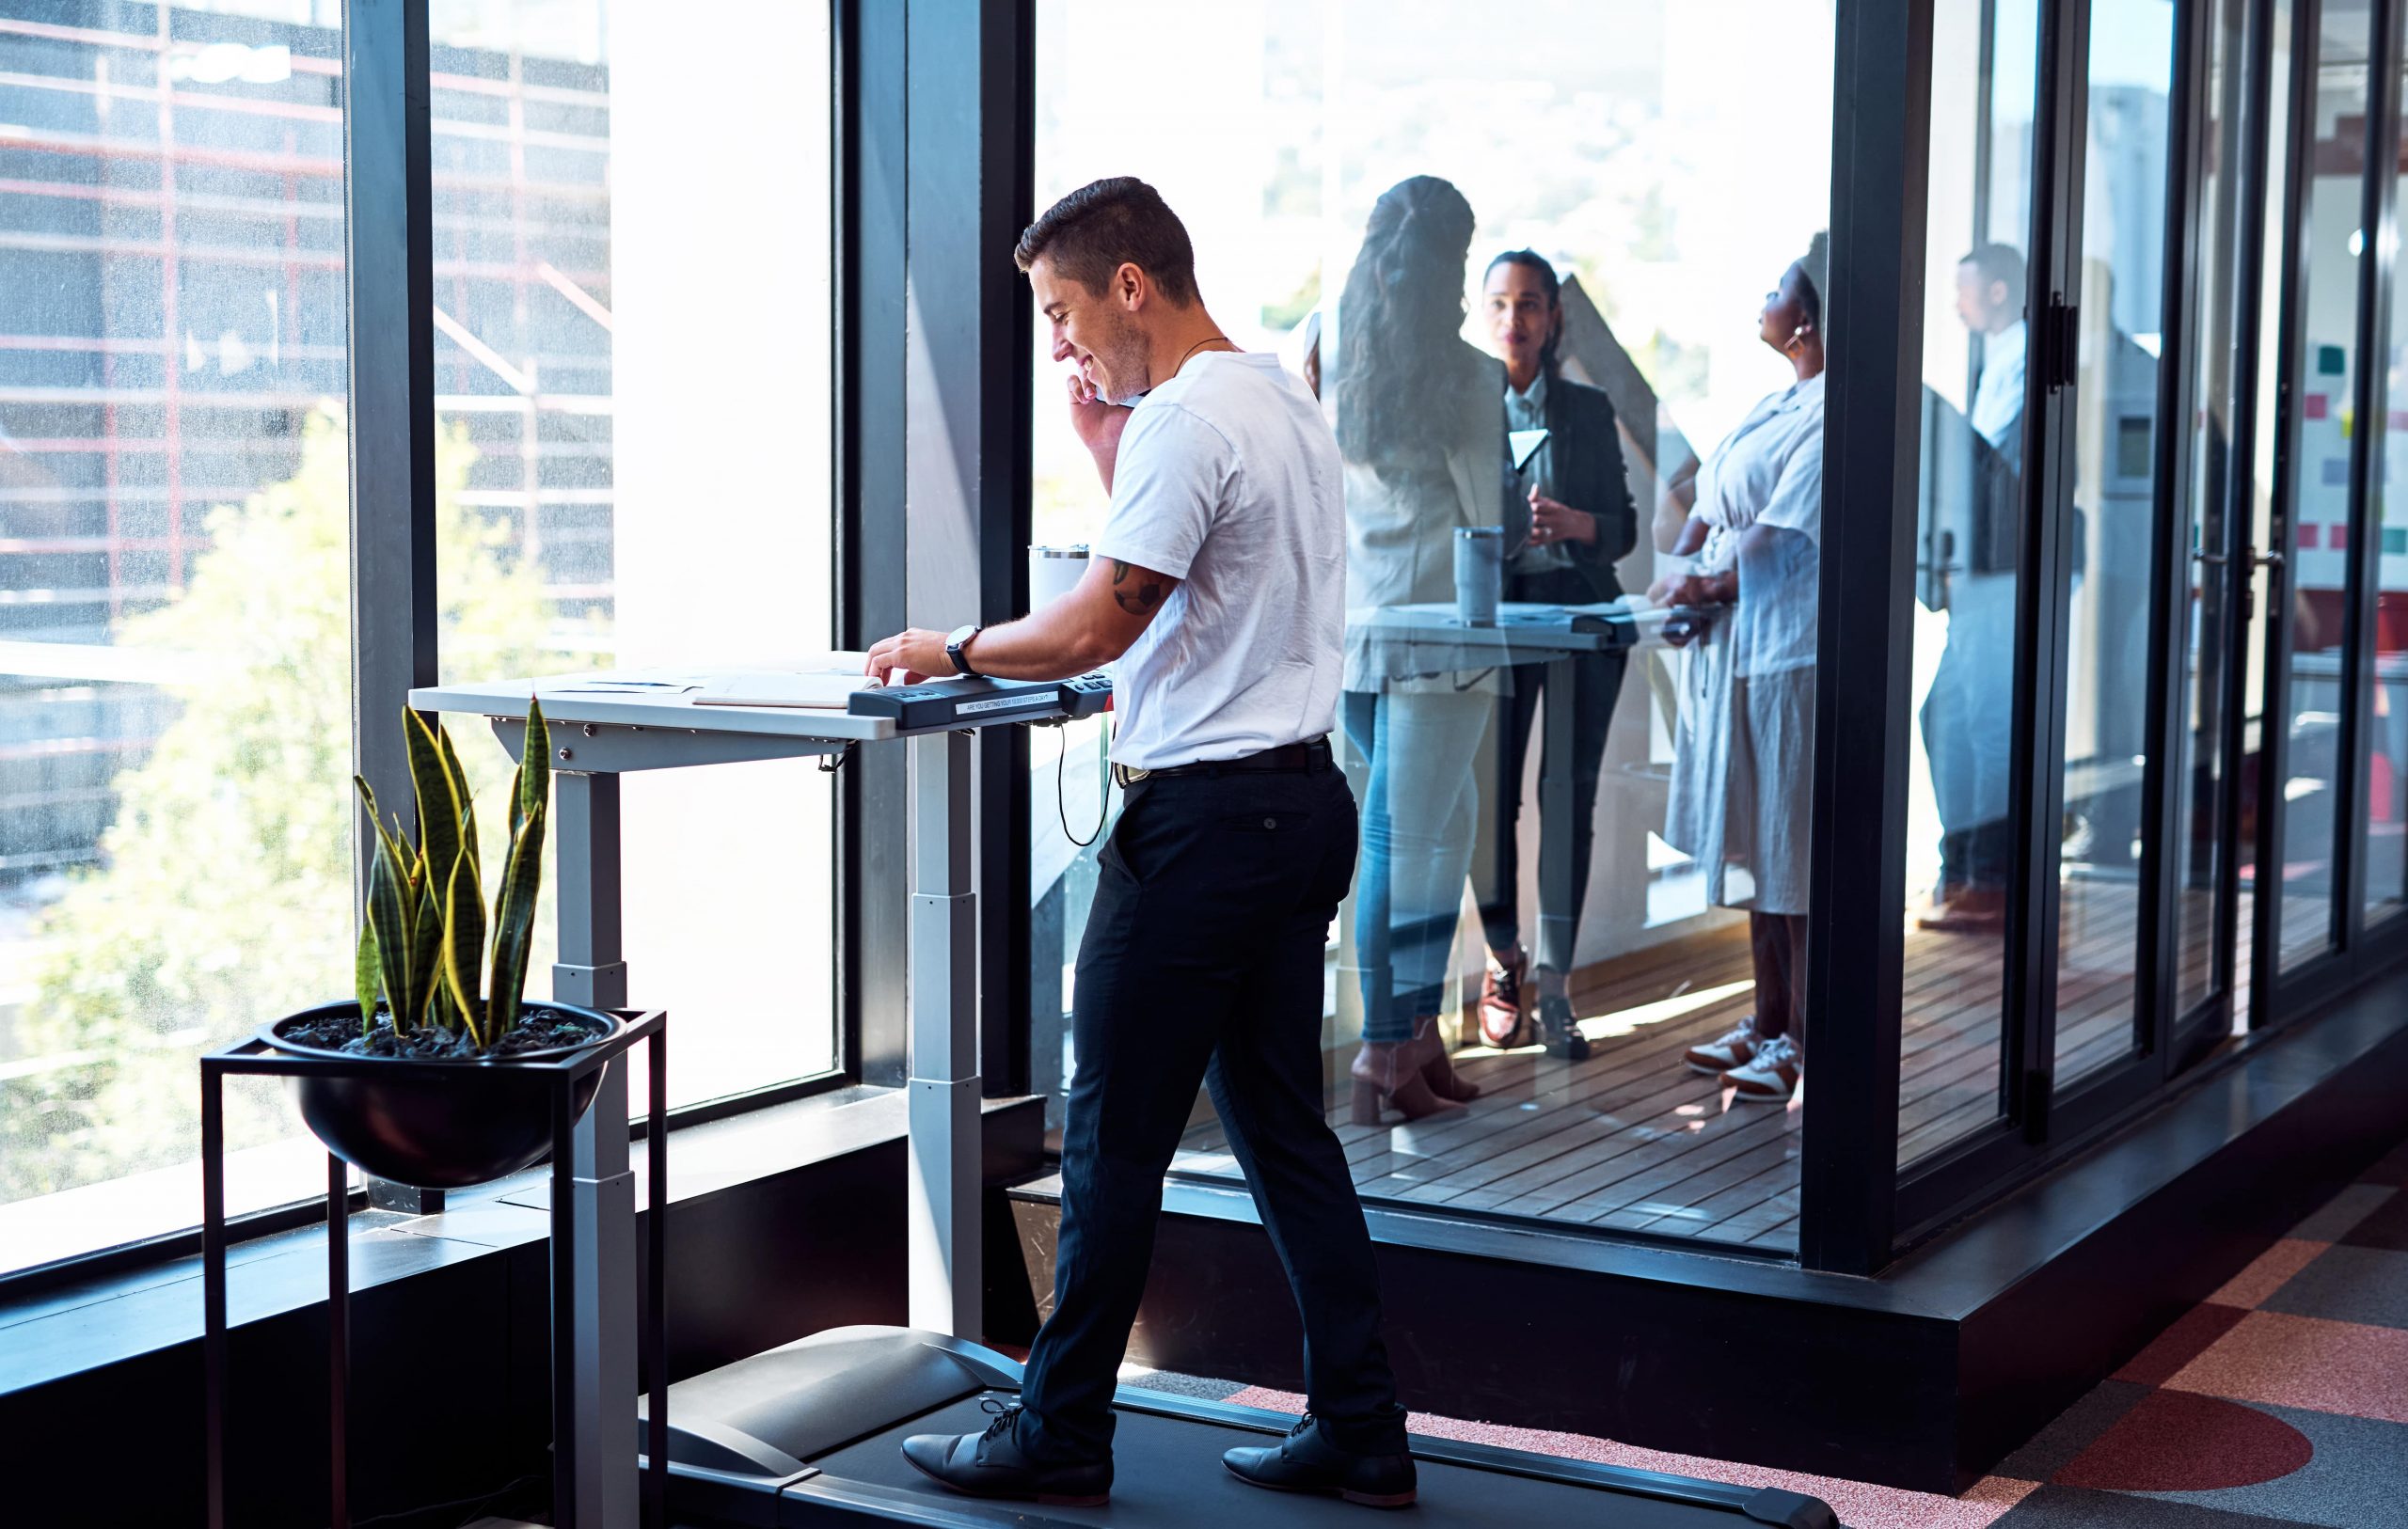 How Many Calories Can You Burn By Using a Treadmill Desk?